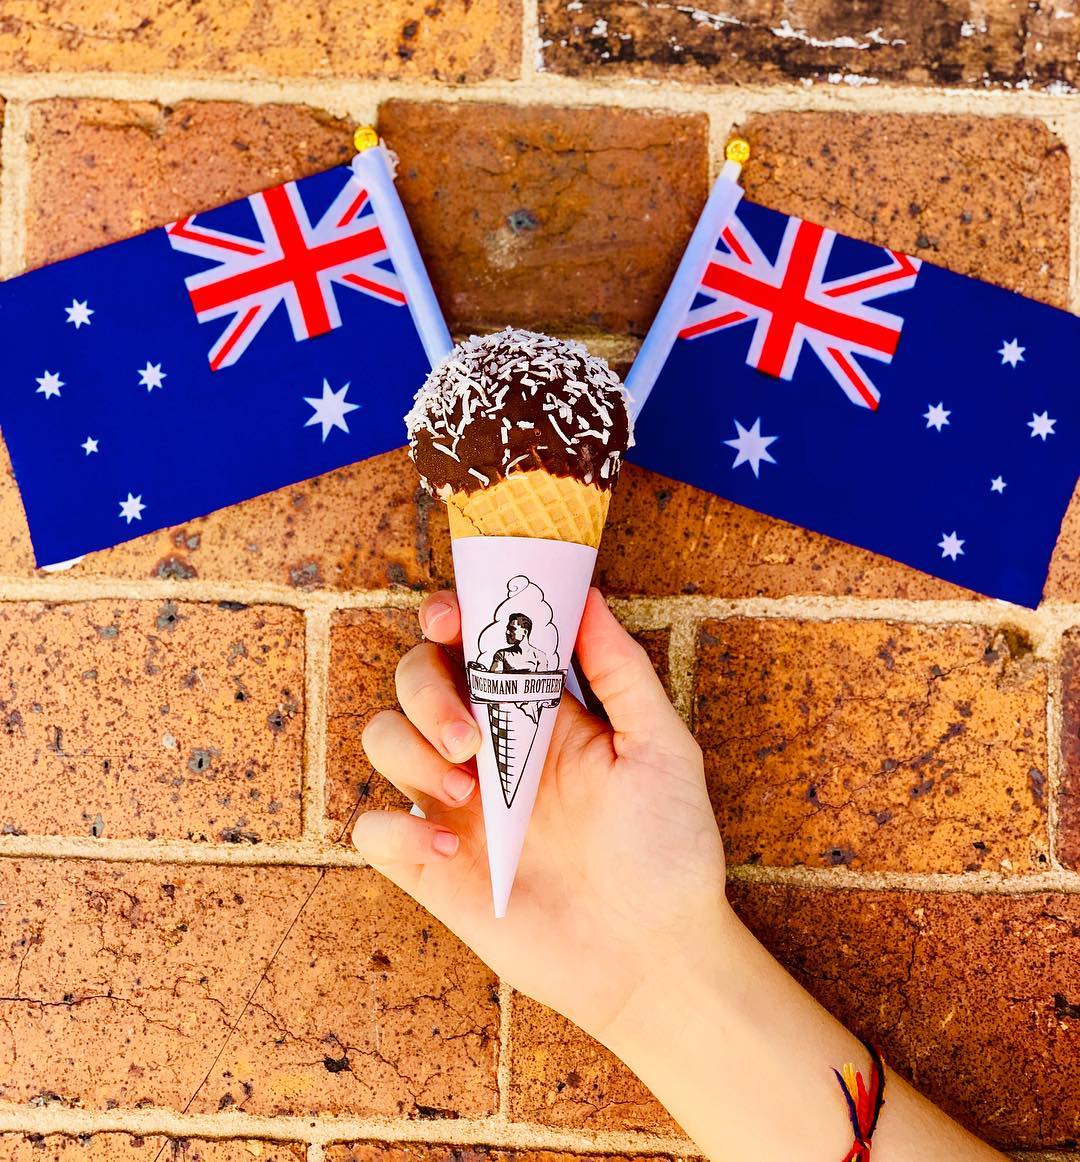 Lamington choc tops are available at UB's Milk Bar for Aussie Day.